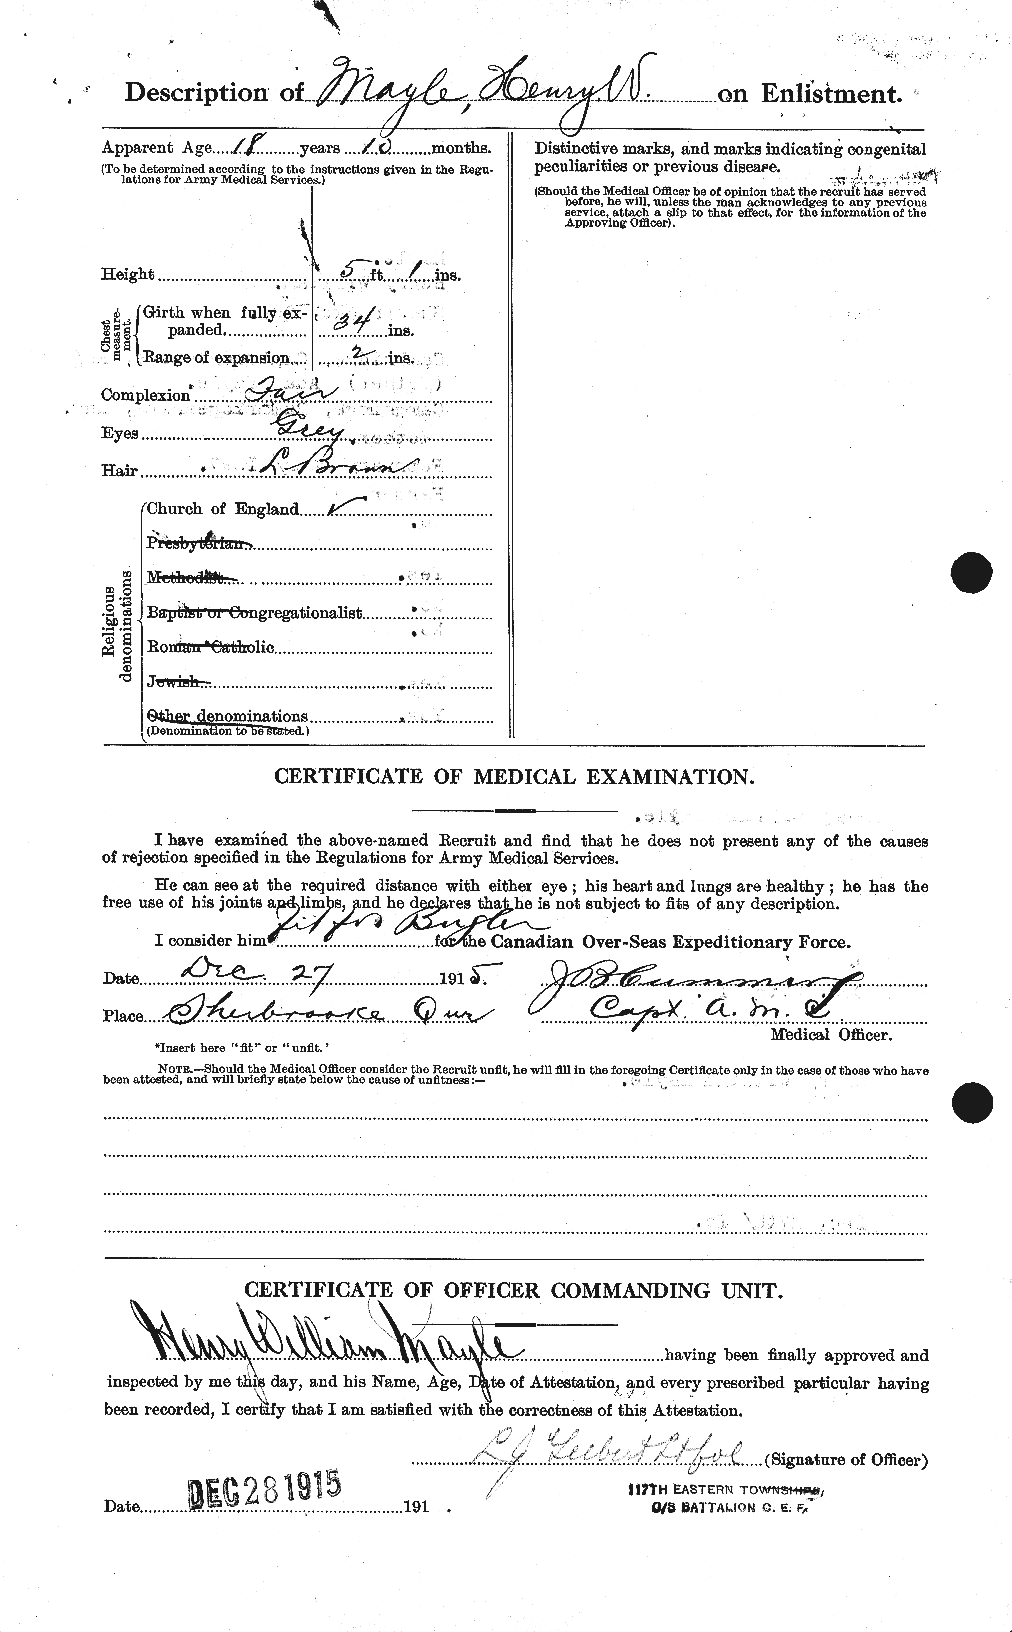 Personnel Records of the First World War - CEF 486595b